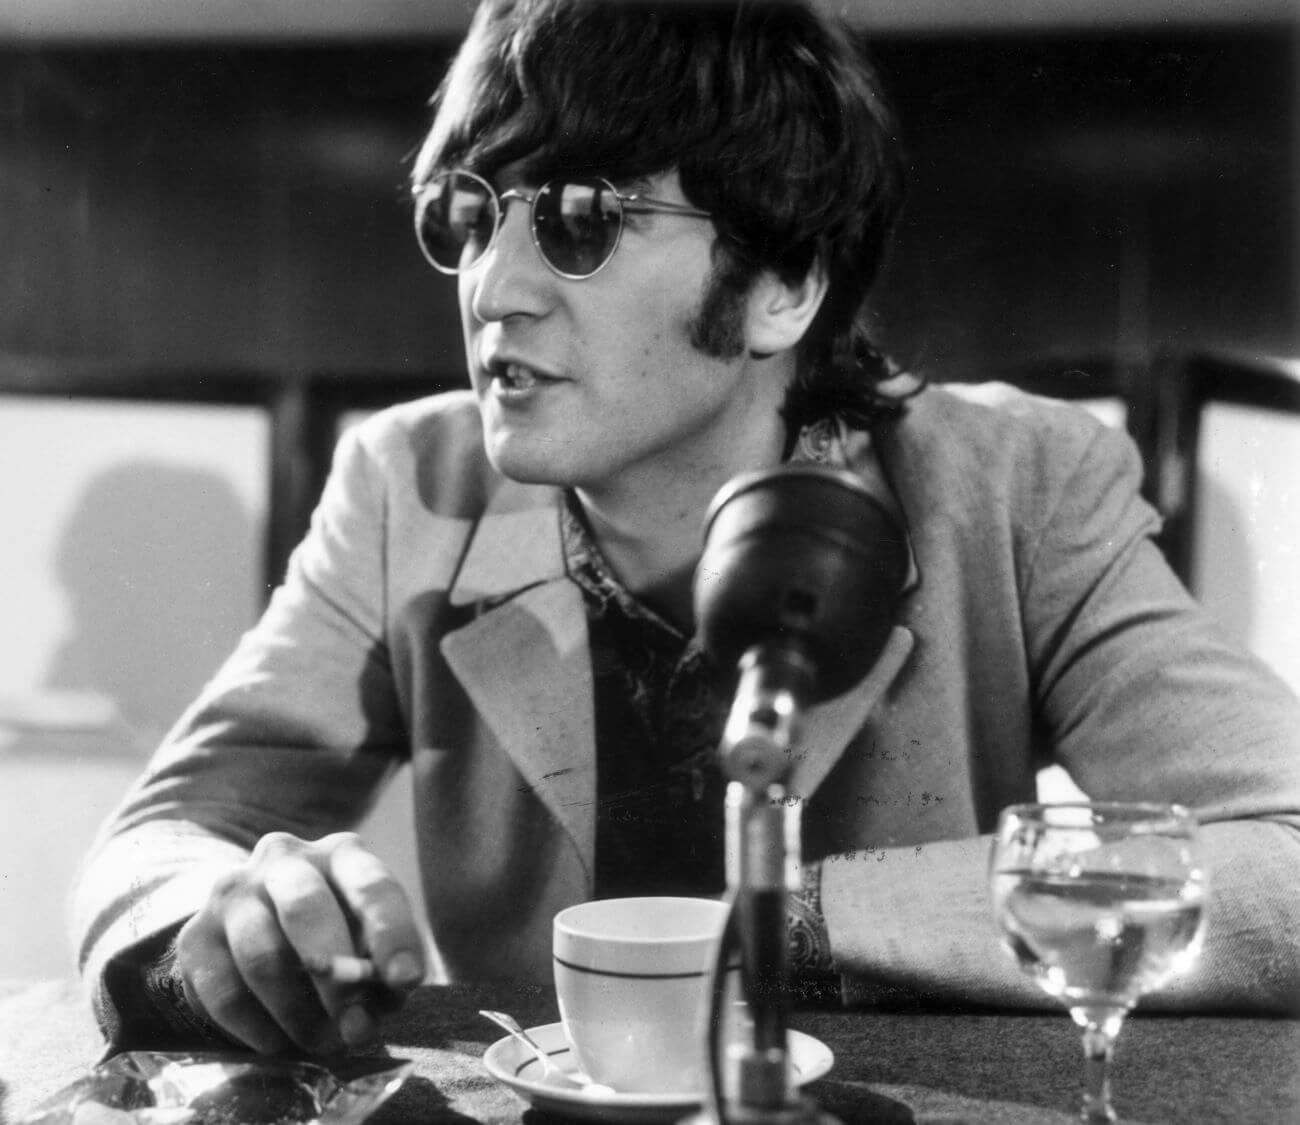 A black and white picture of John Lennon wearing sunglasses and sitting in front of a microphone, coffee cup, and water glass.